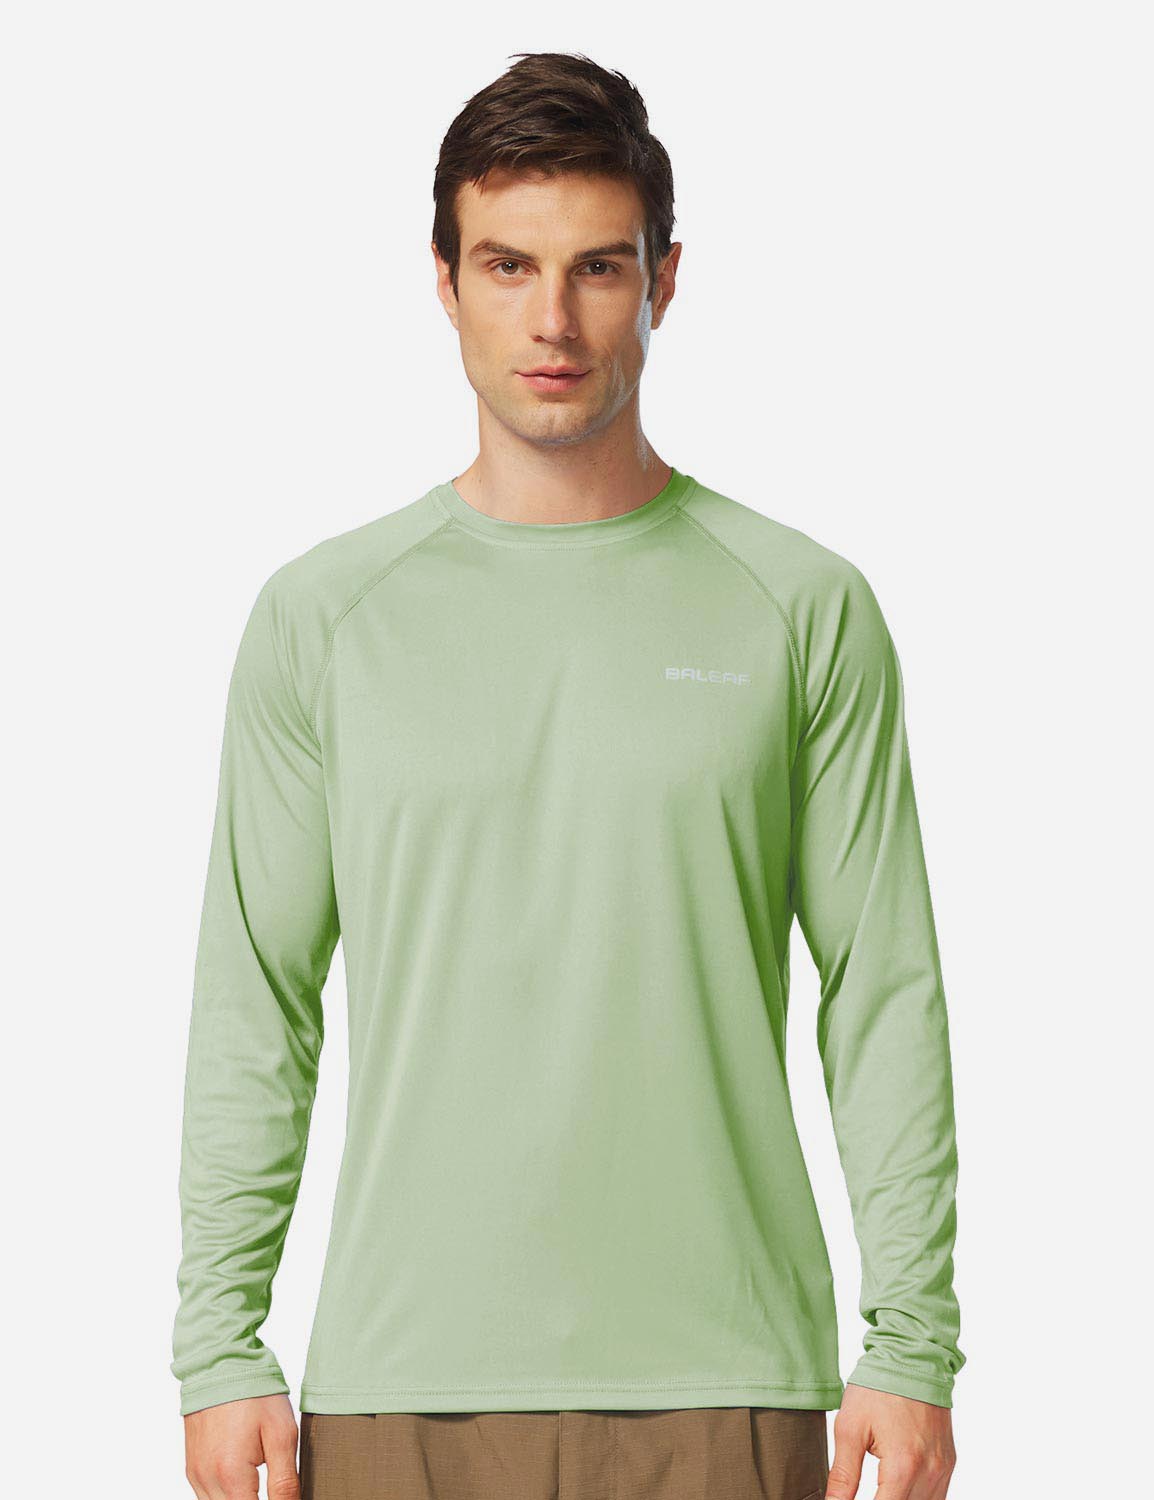 Baleaf Men's UPF50+ Long Sleeved Loose Fit Casual T-Shirt aga002 Pale Green Front